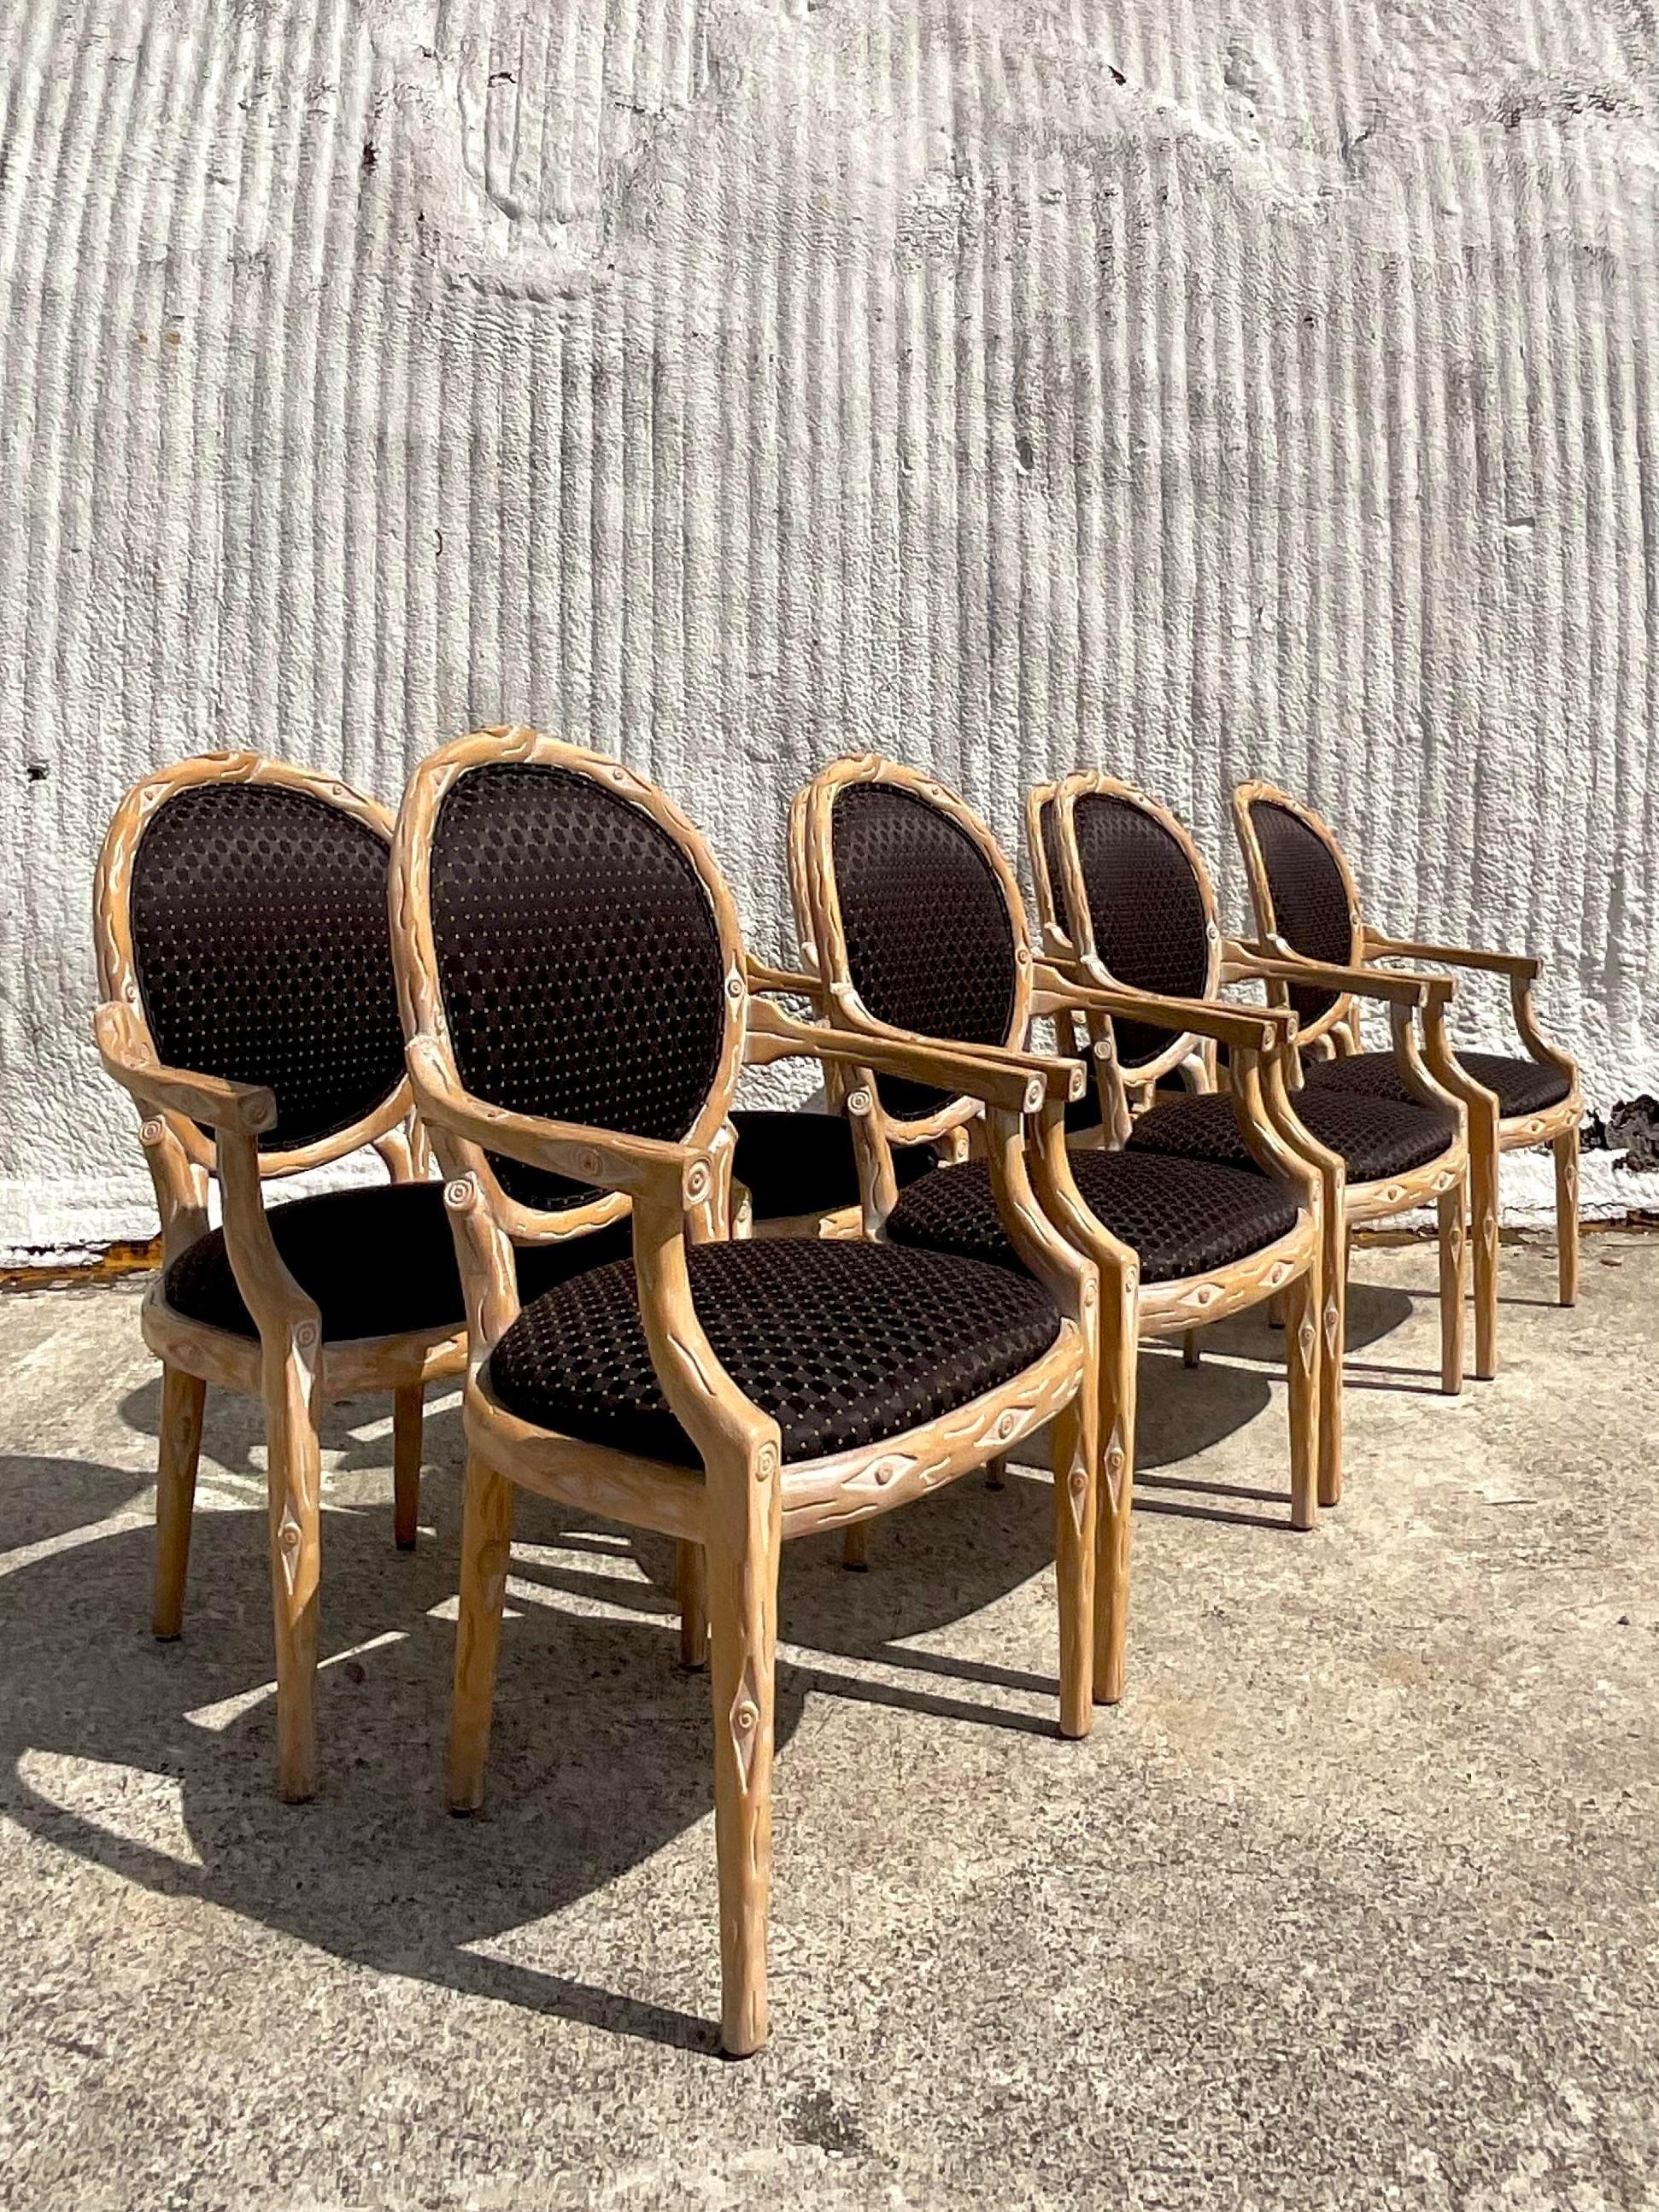 Vintage Boho Faux Bois Dining Chairs - Set of 8 For Sale 1